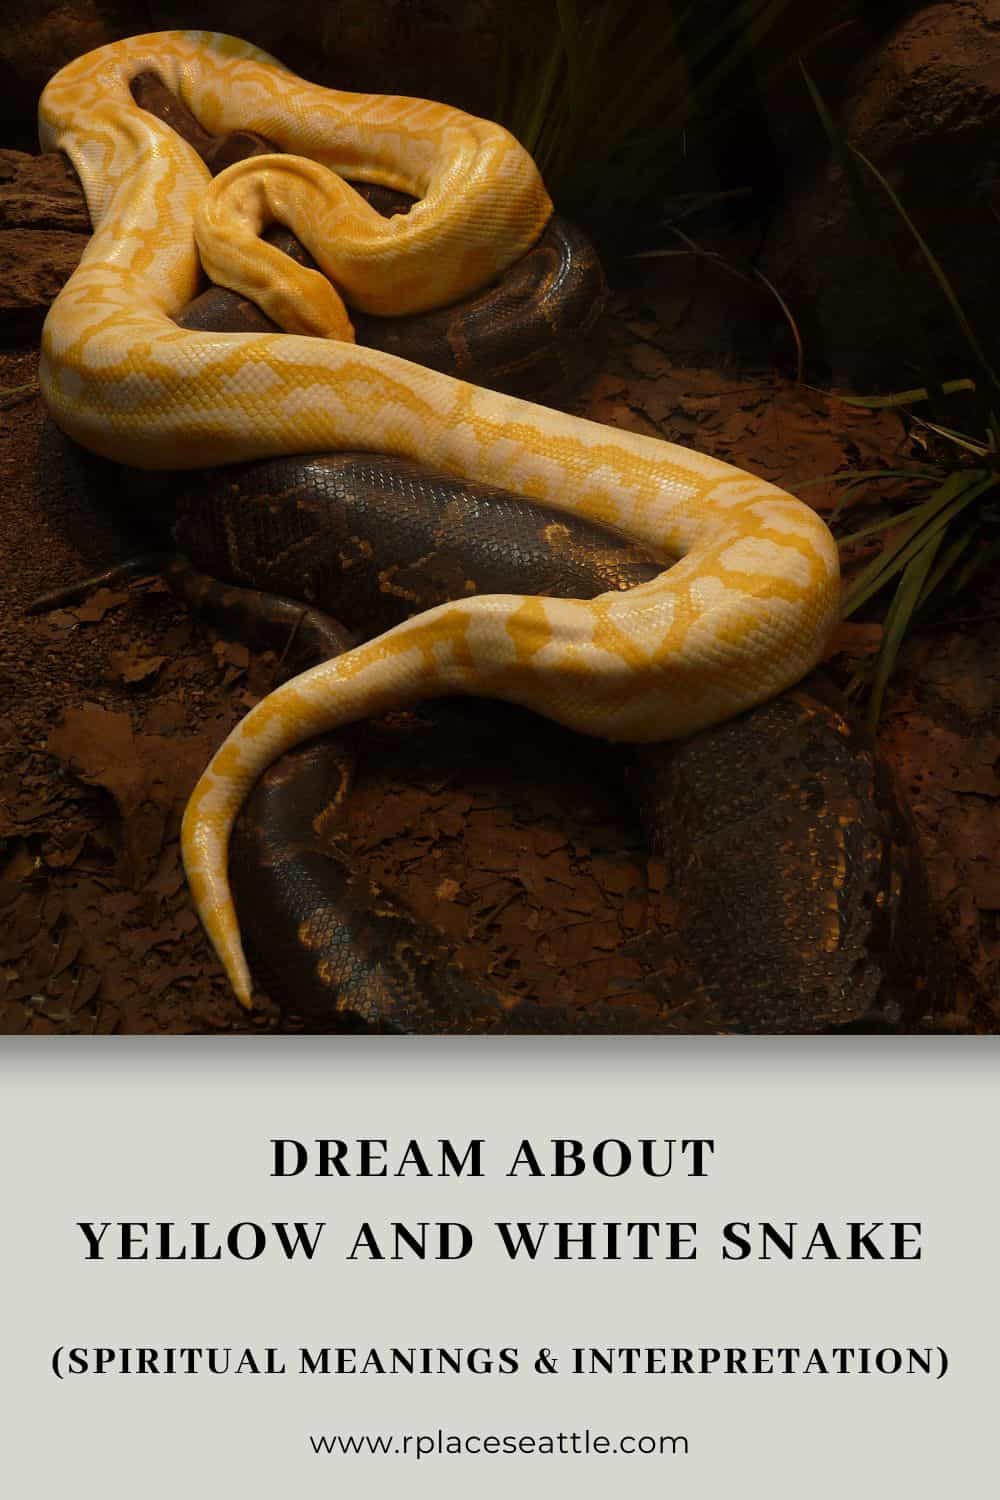 Dream About Yellow and White Snake (Spiritual Meanings & Interpretation)